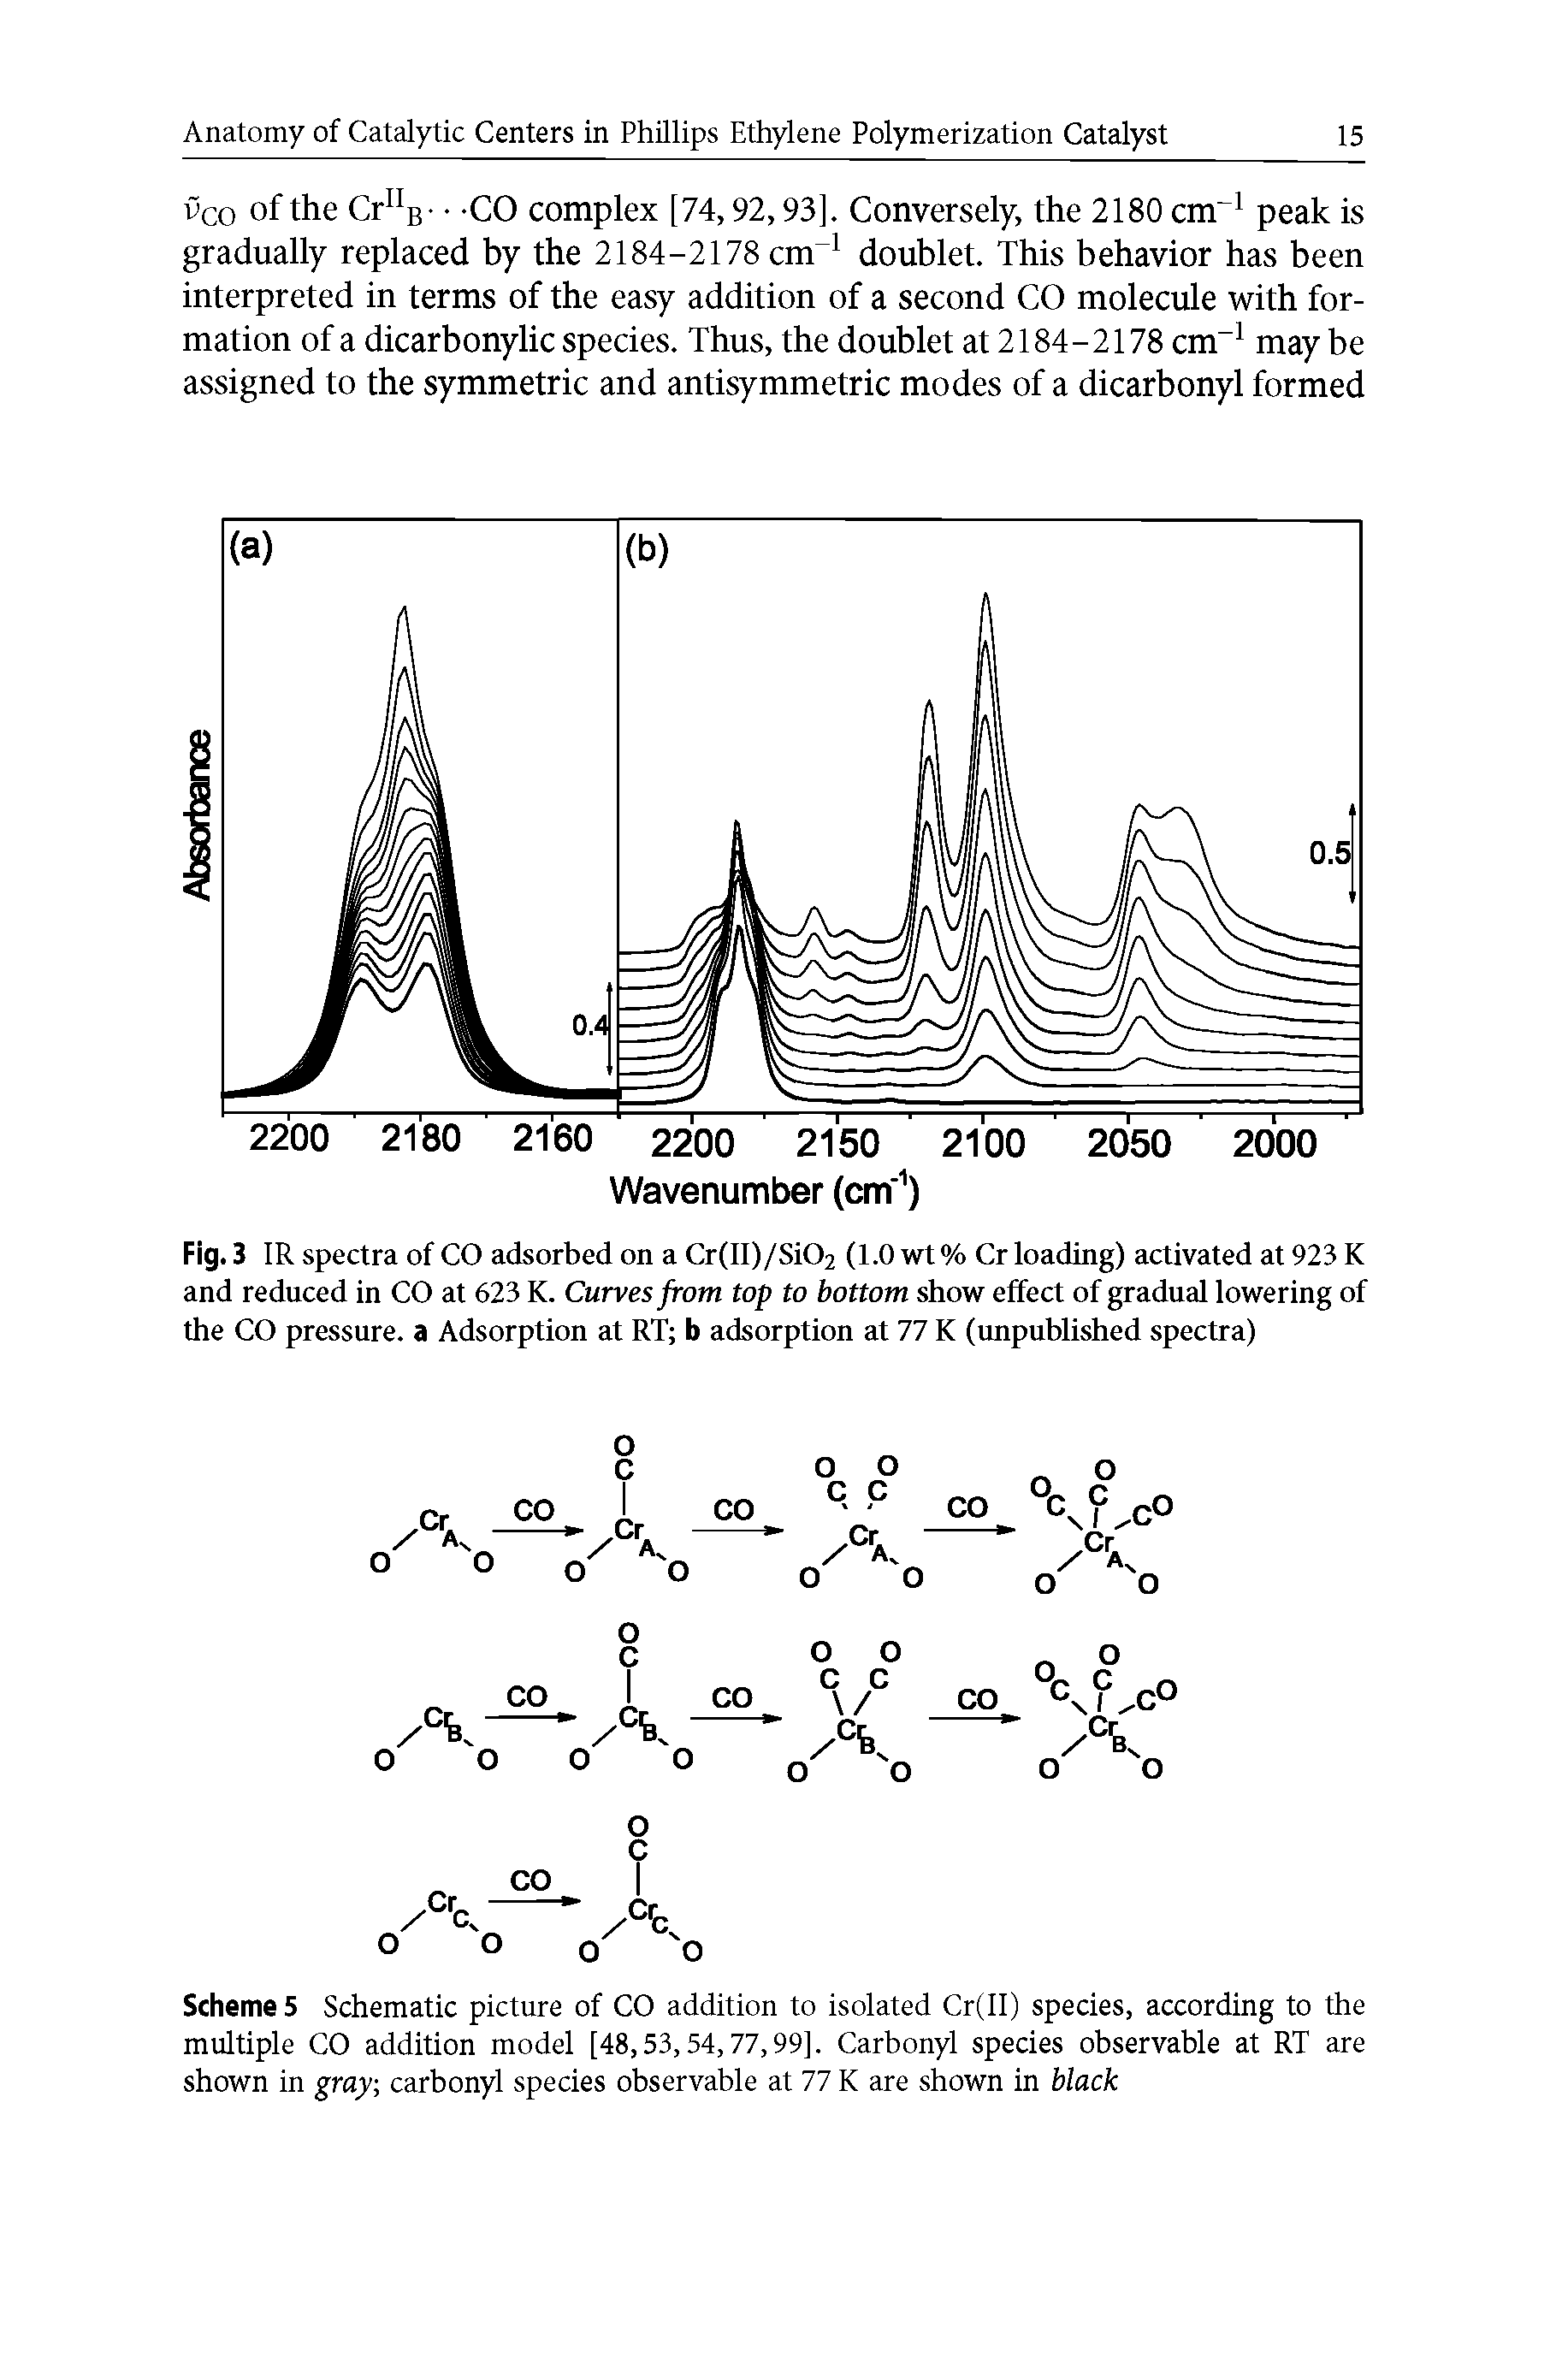 Scheme 5 Schematic picture of CO addition to isolated Cr(II) species, according to the multiple CO addition model [48,53,54,77,99]. Carbonyl species observable at RT are shown in gray carbonyl species observable at 77 K are shown in black...